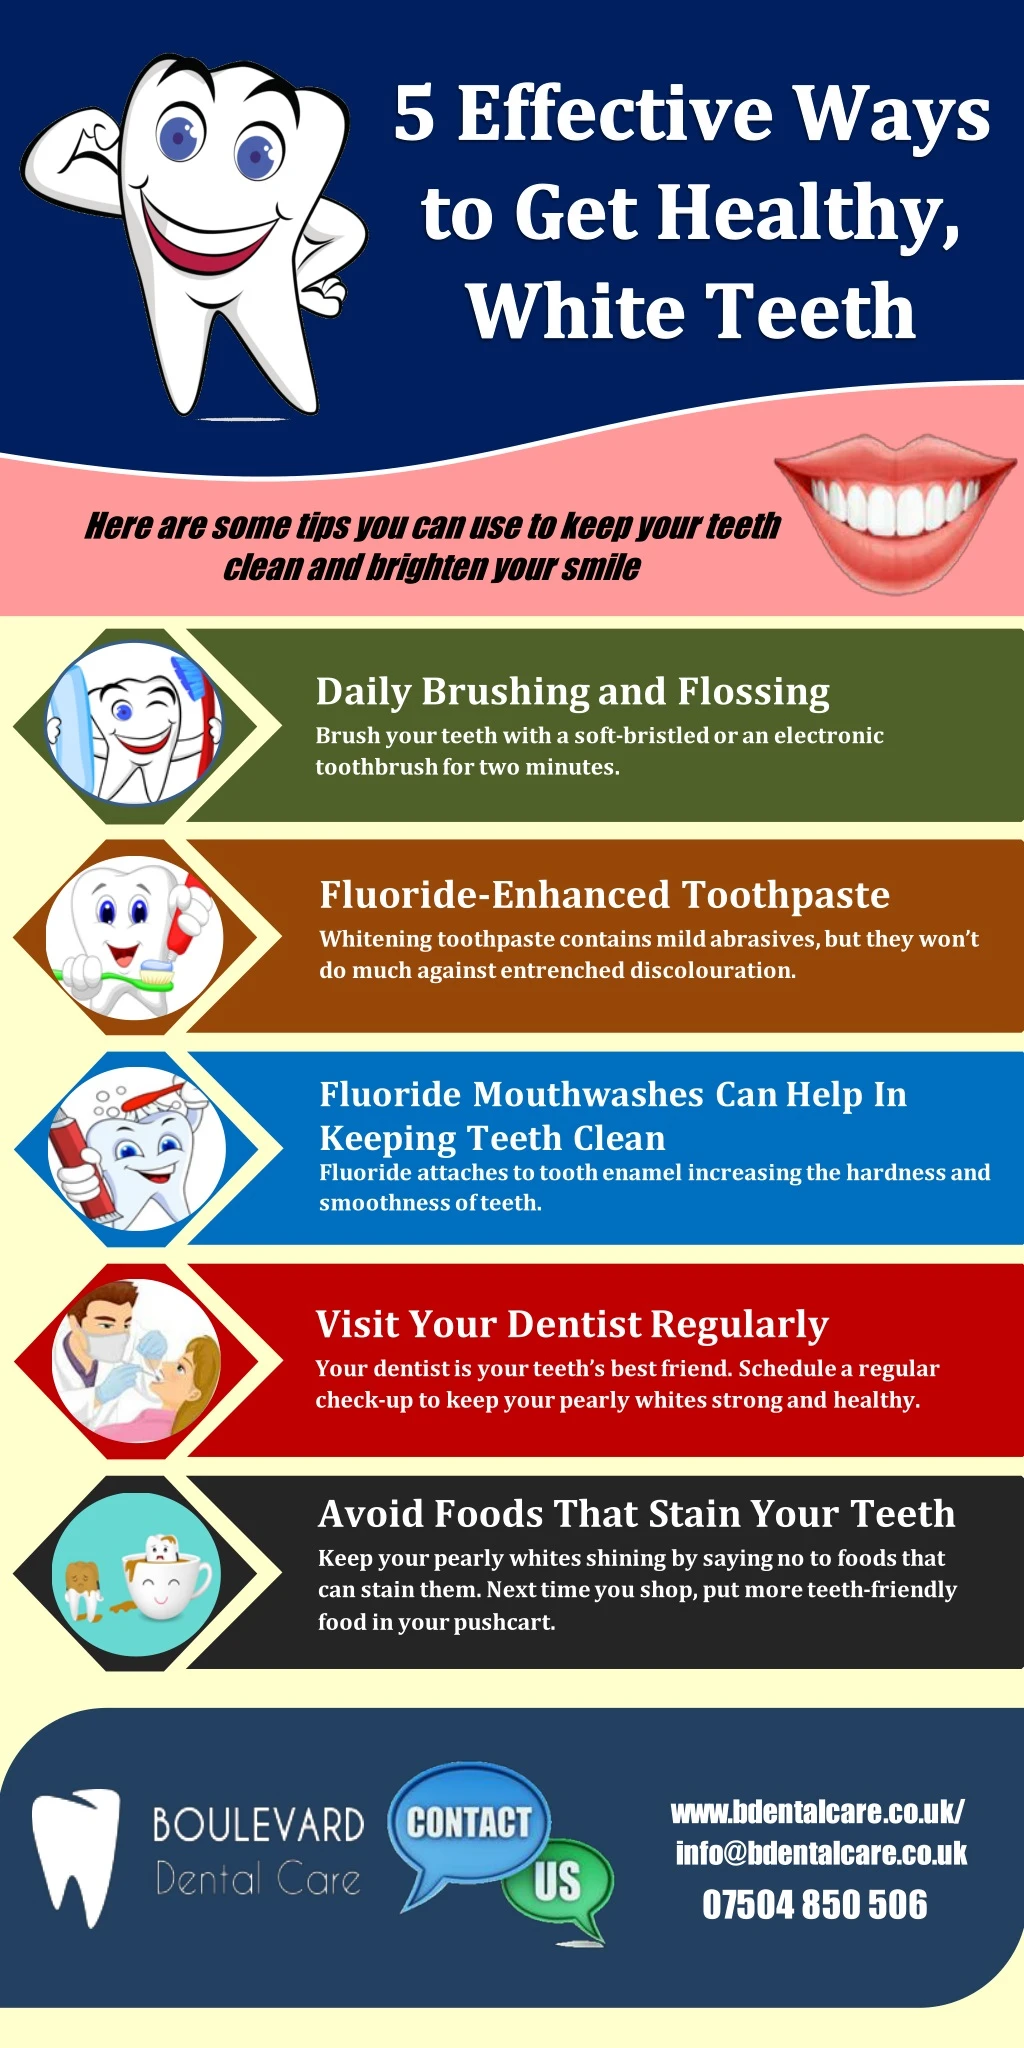 here are some tips you can use to keep your teeth